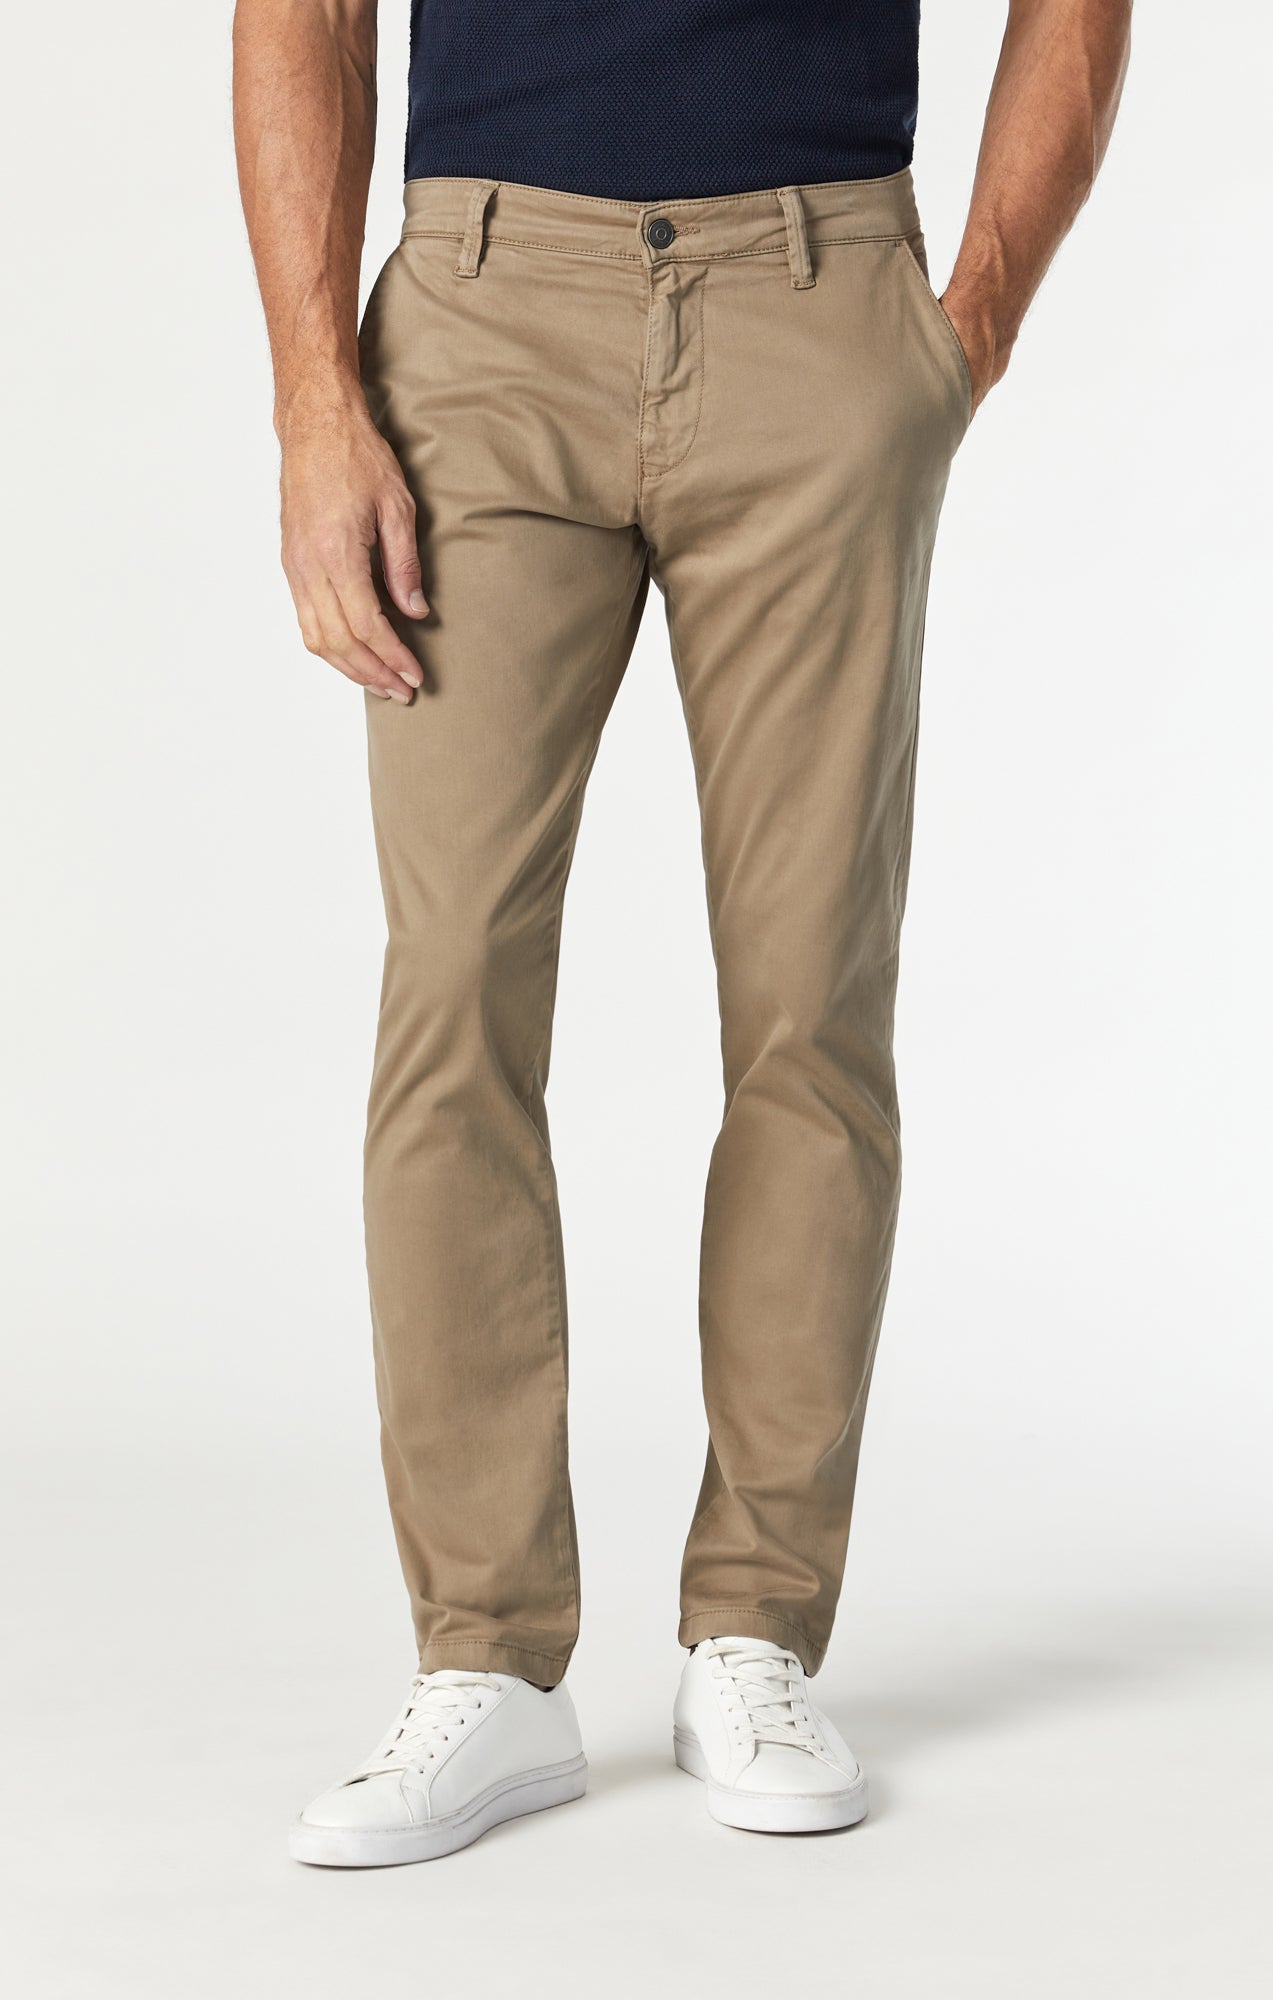 BRYAN SKINNY-FIT SHORTS IN SOFT STRETCH COTTON TWILL